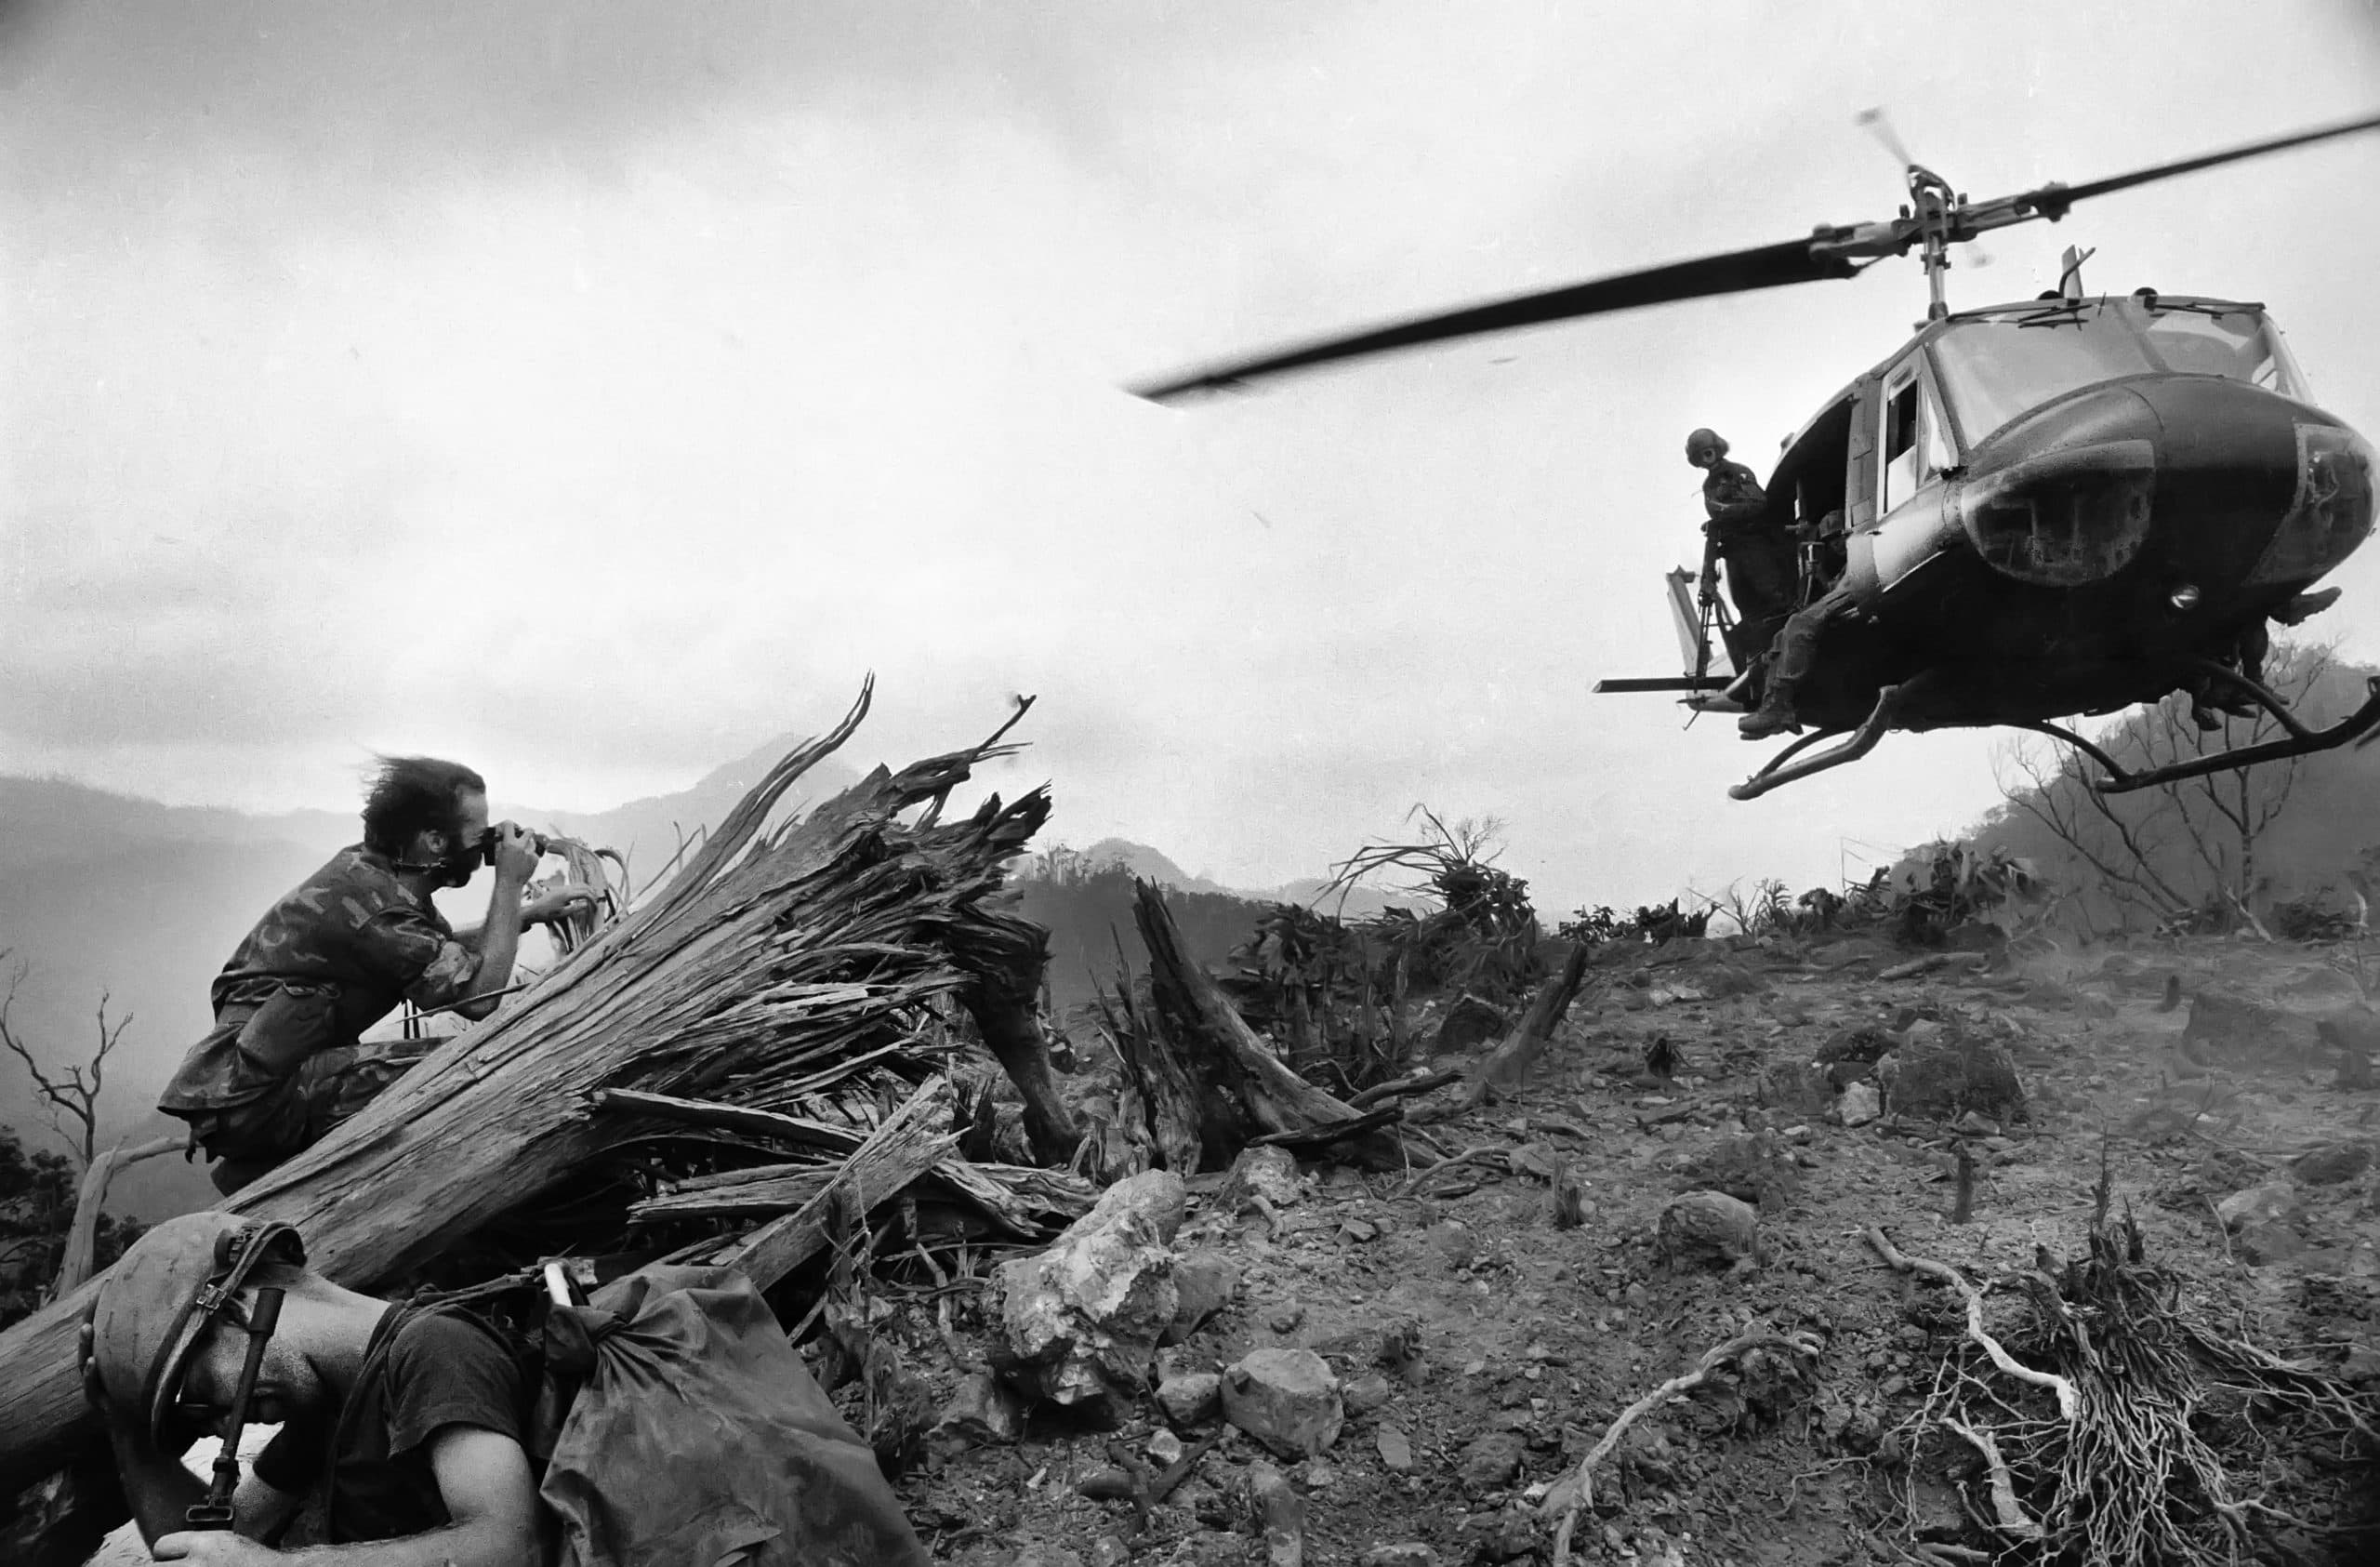 David Hume Kennerly photographing a combat assault in the Central Highlands of S. Vietnam, 1971. (photo by Matt Franjola)